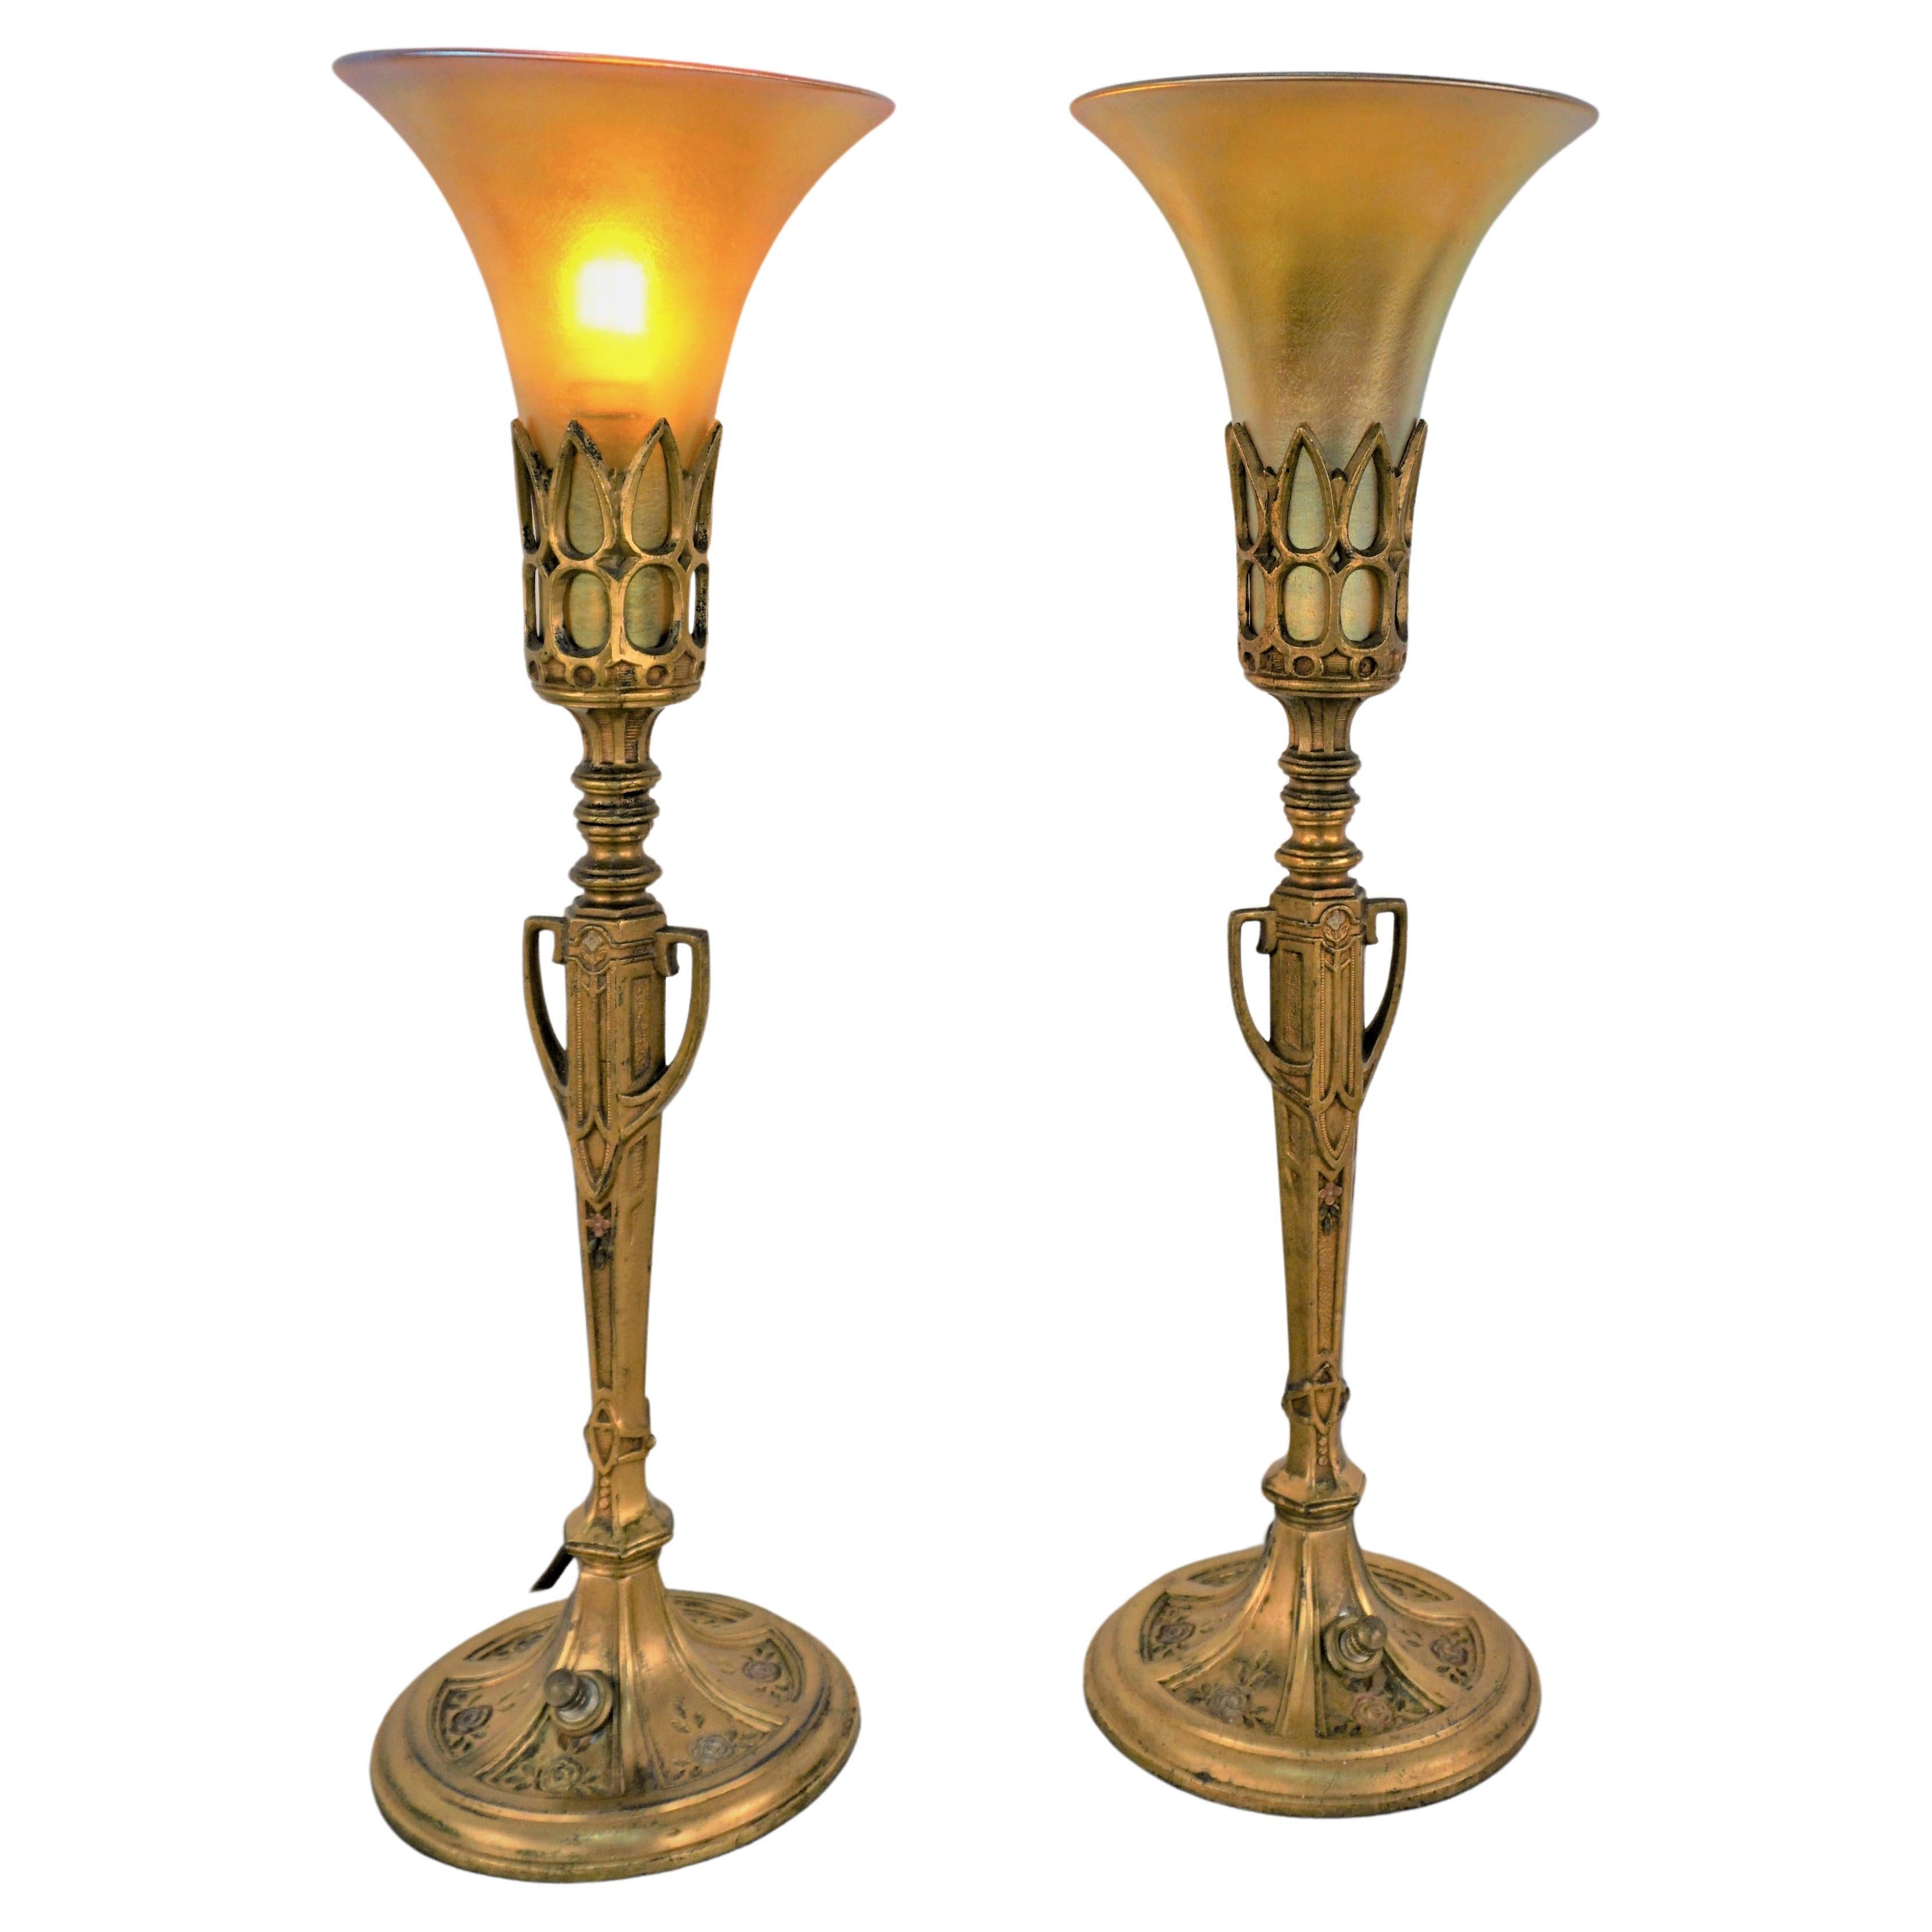 Pair of American Art Deco Table Lamps with Iridescent Art Glass Shades